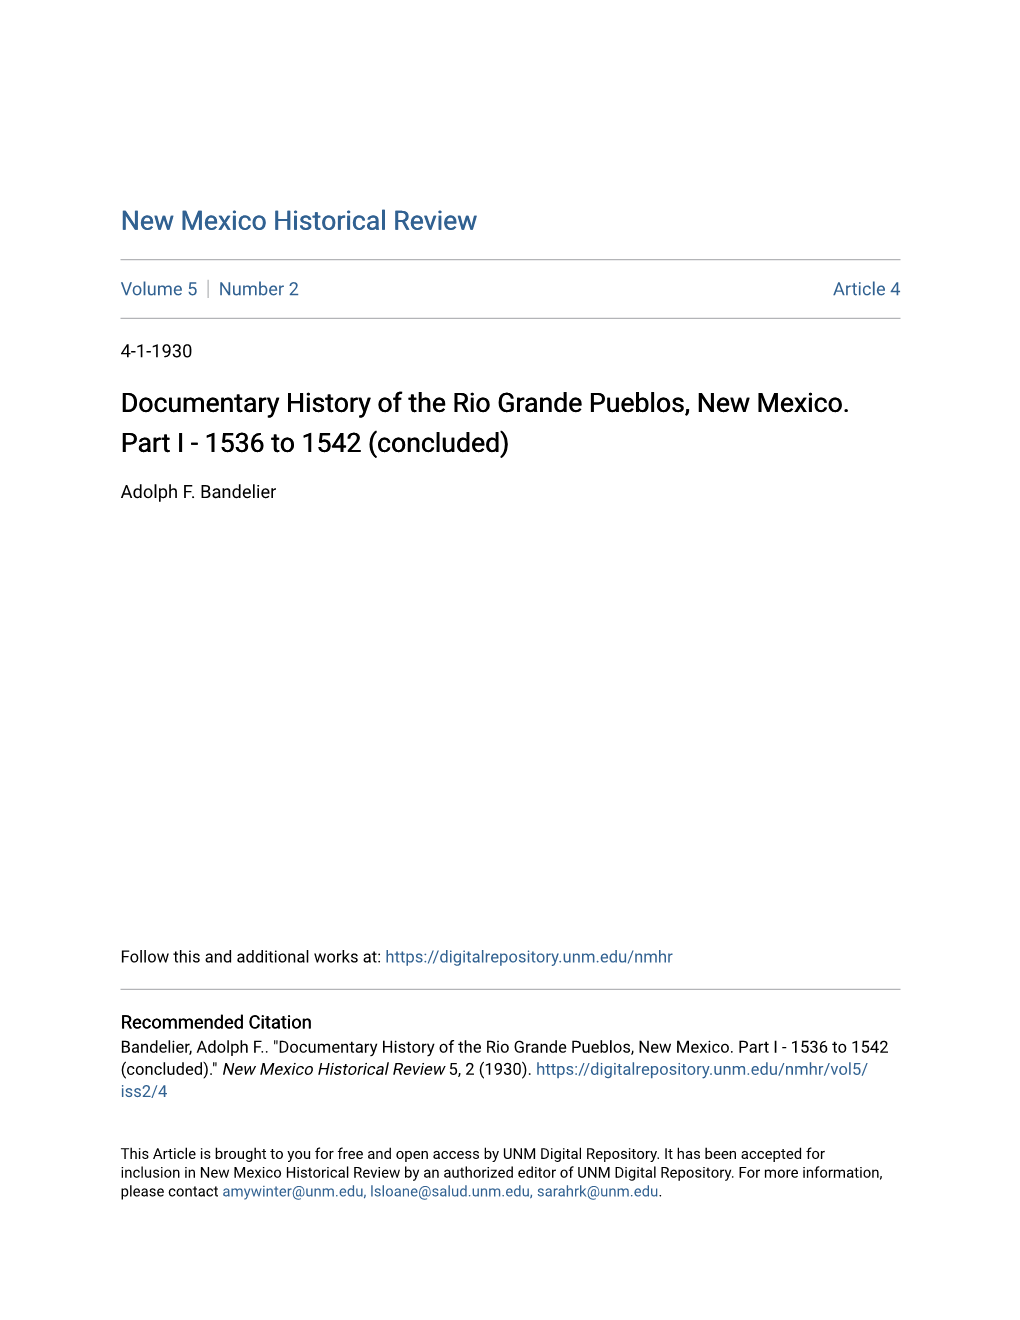 Documentary History of the Rio Grande Pueblos, New Mexico. Part I - 1536 to 1542 (Concluded)